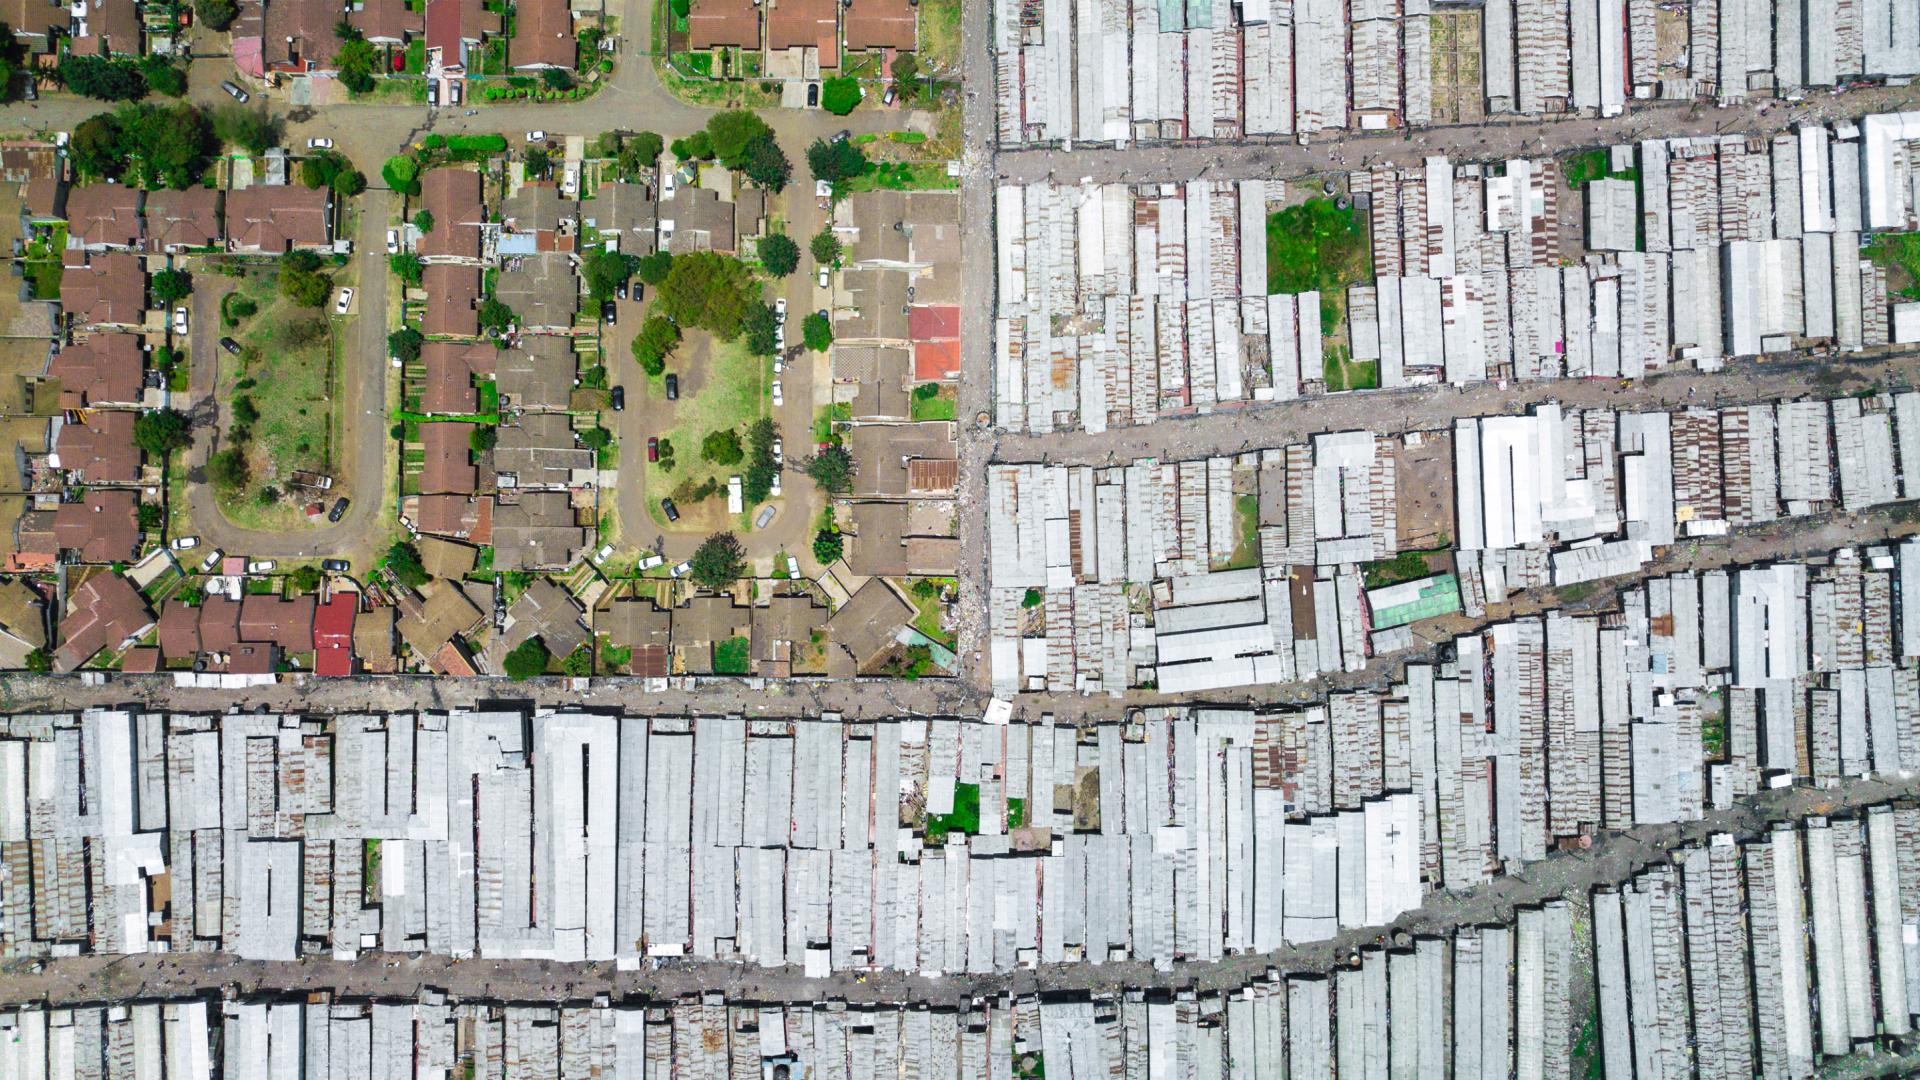 Aerial view spacious and green housing development surrouned by clustered low-income housing